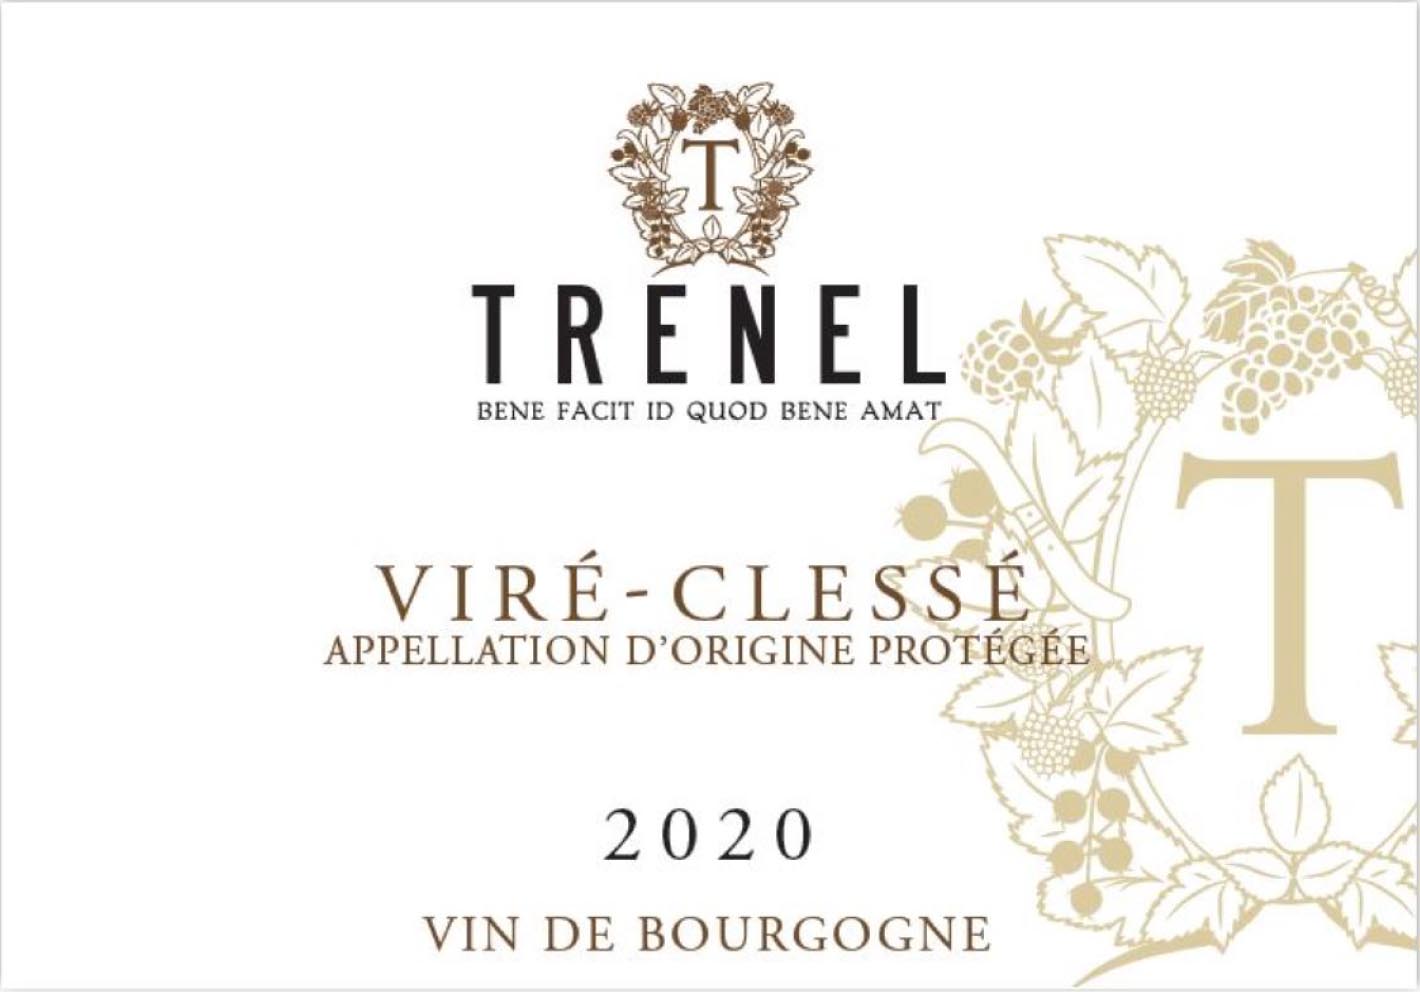 Trenel - Vire-Clesse label